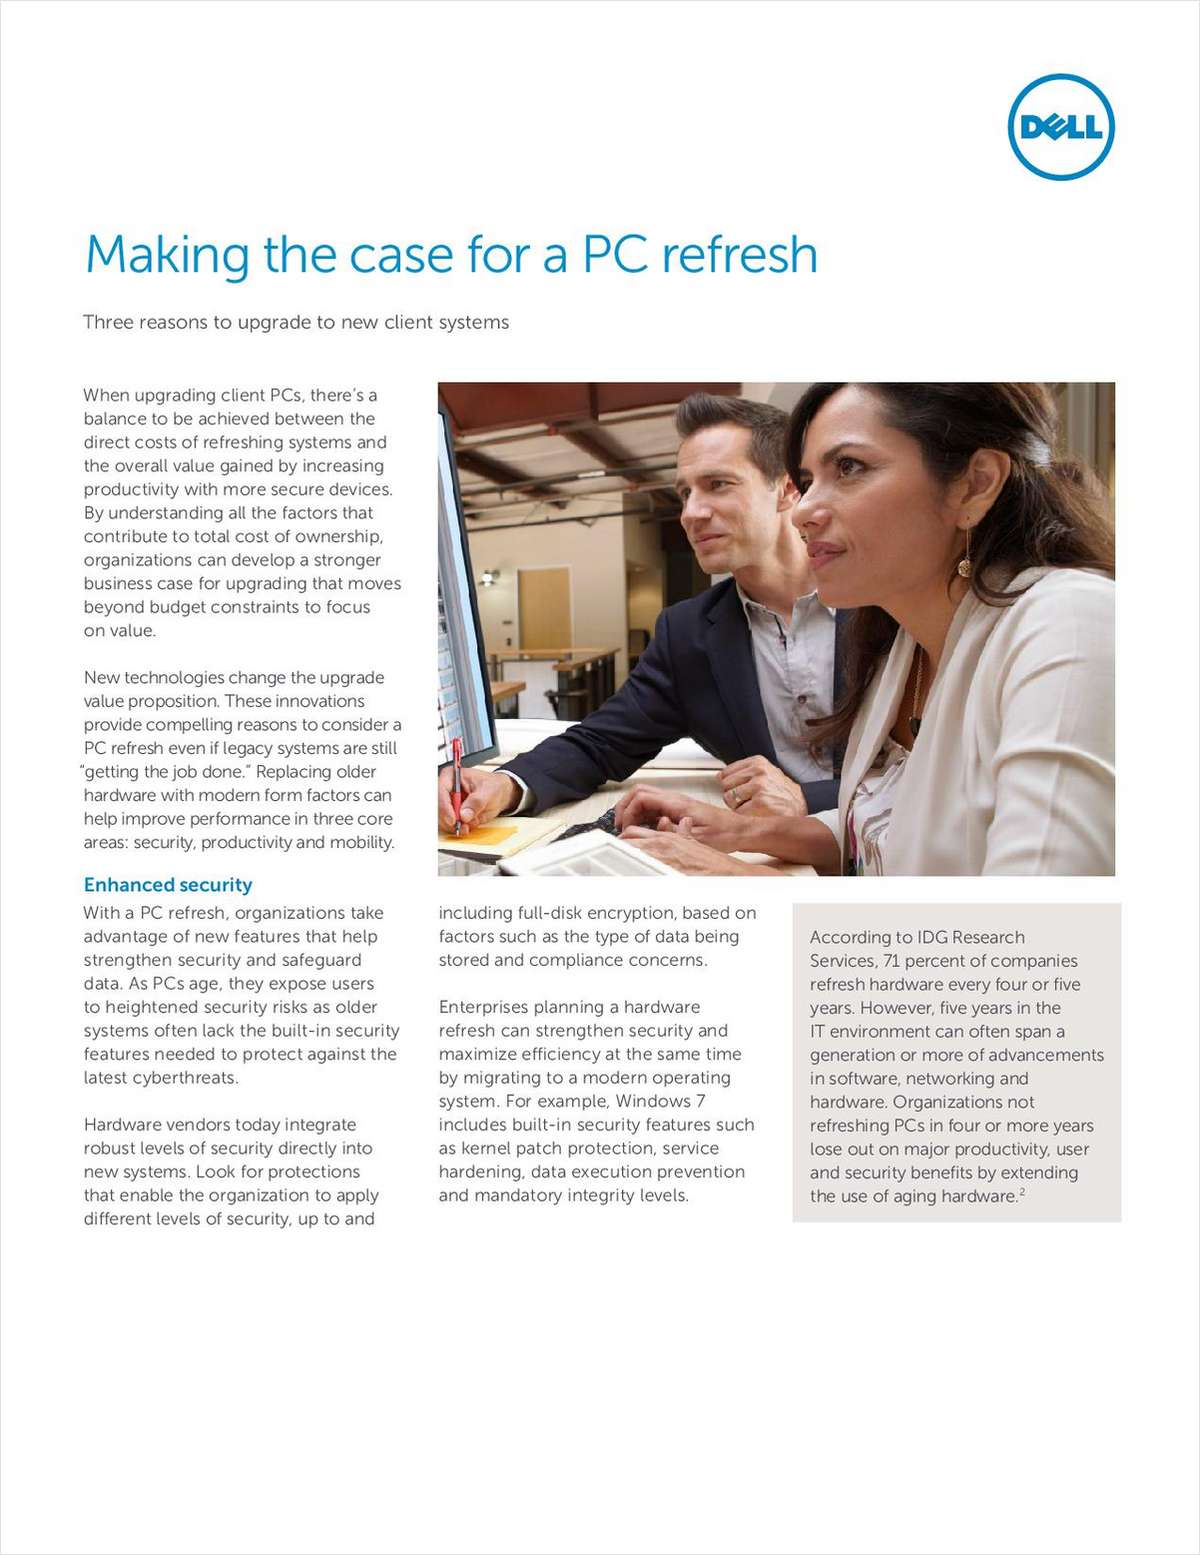 Making the Case for a PC Refresh - Three Reasons to Upgrade to New Client Systems Screenshot